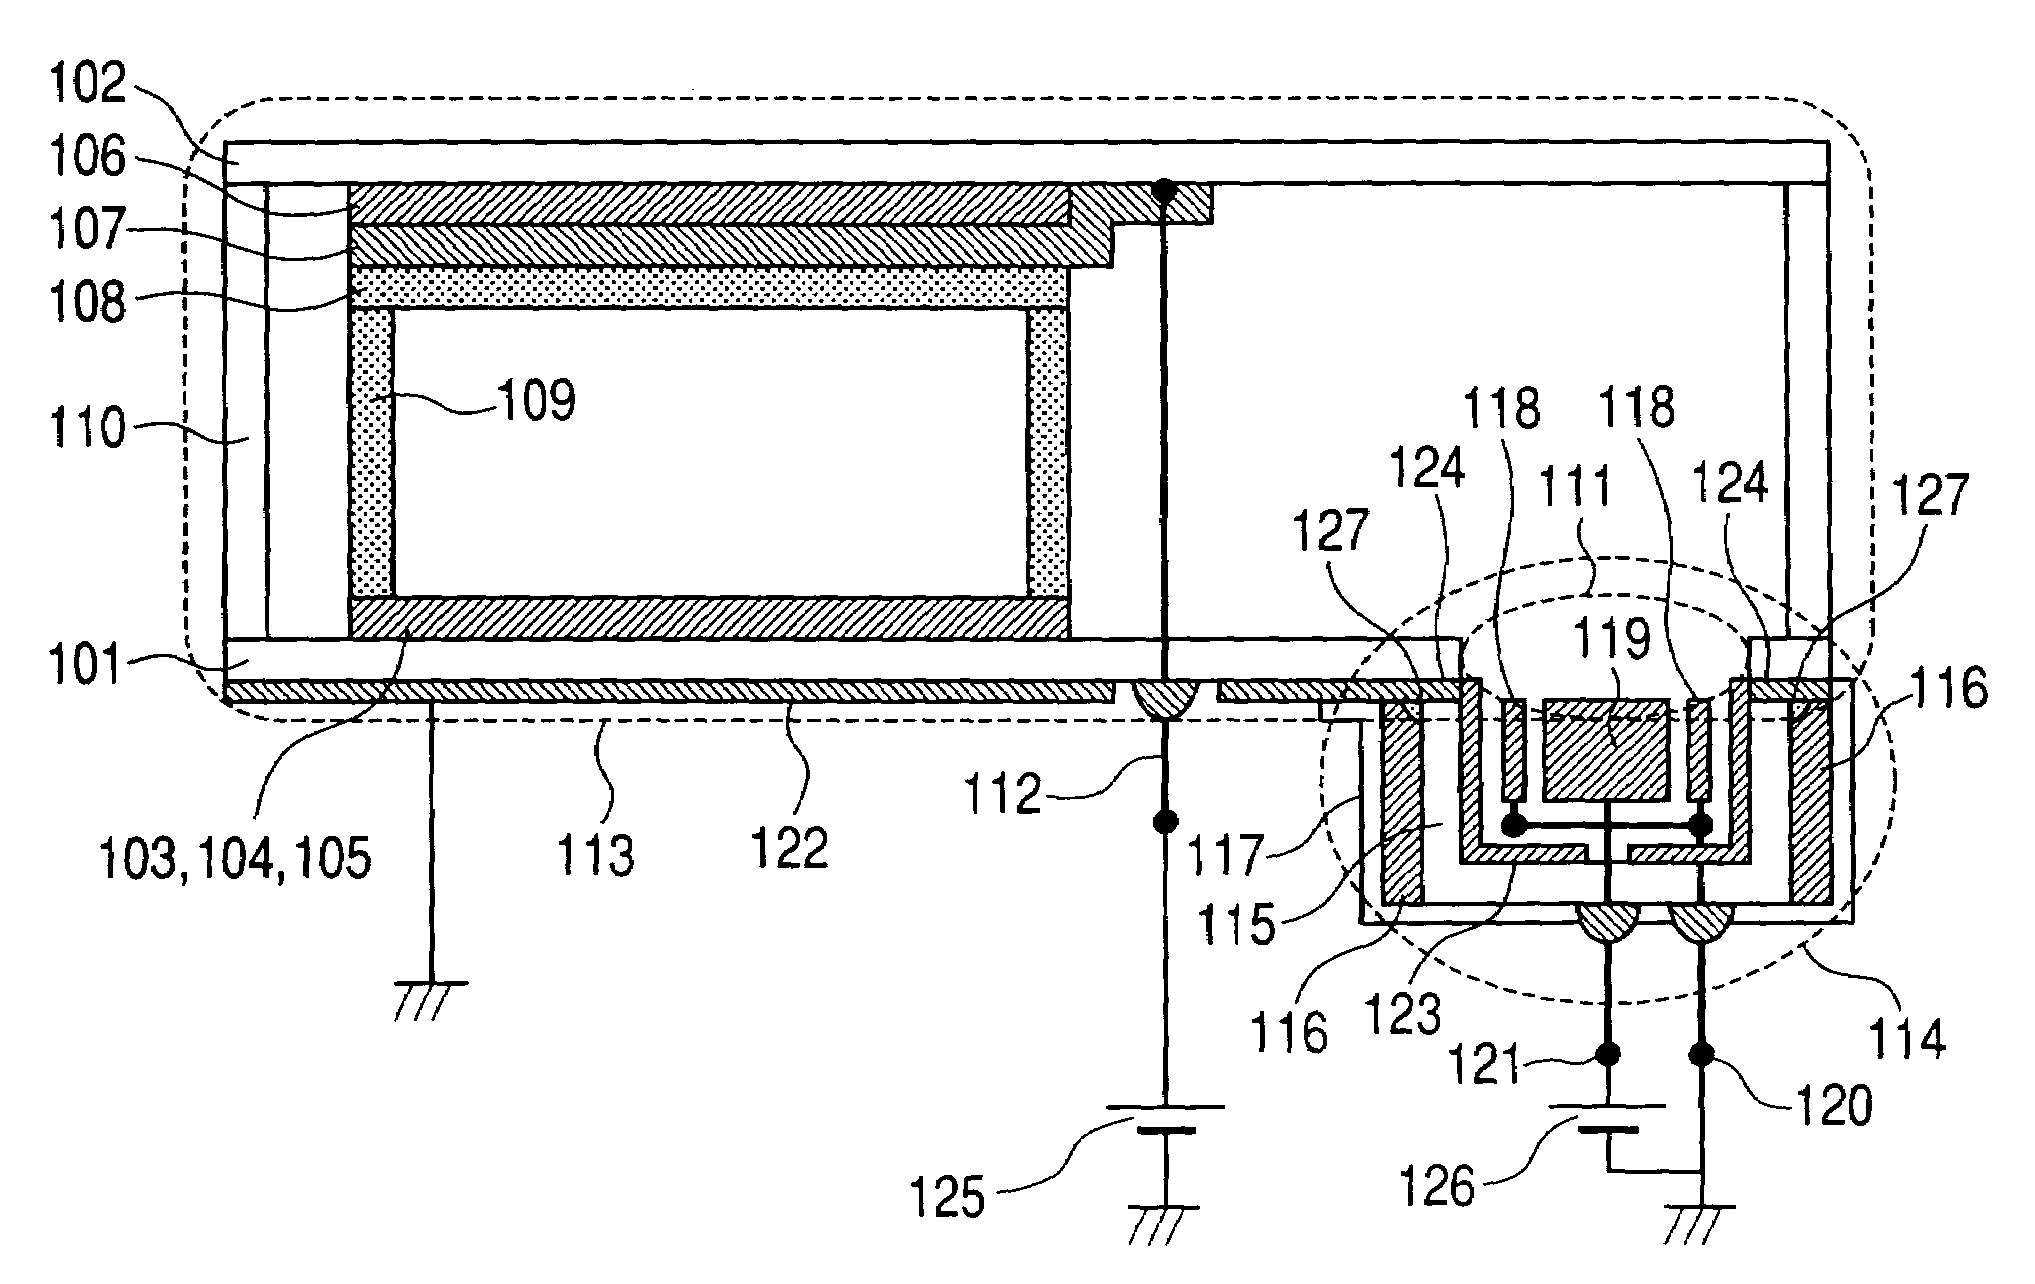 Image display apparatus provided with an ion pump assembly arranged within an external container